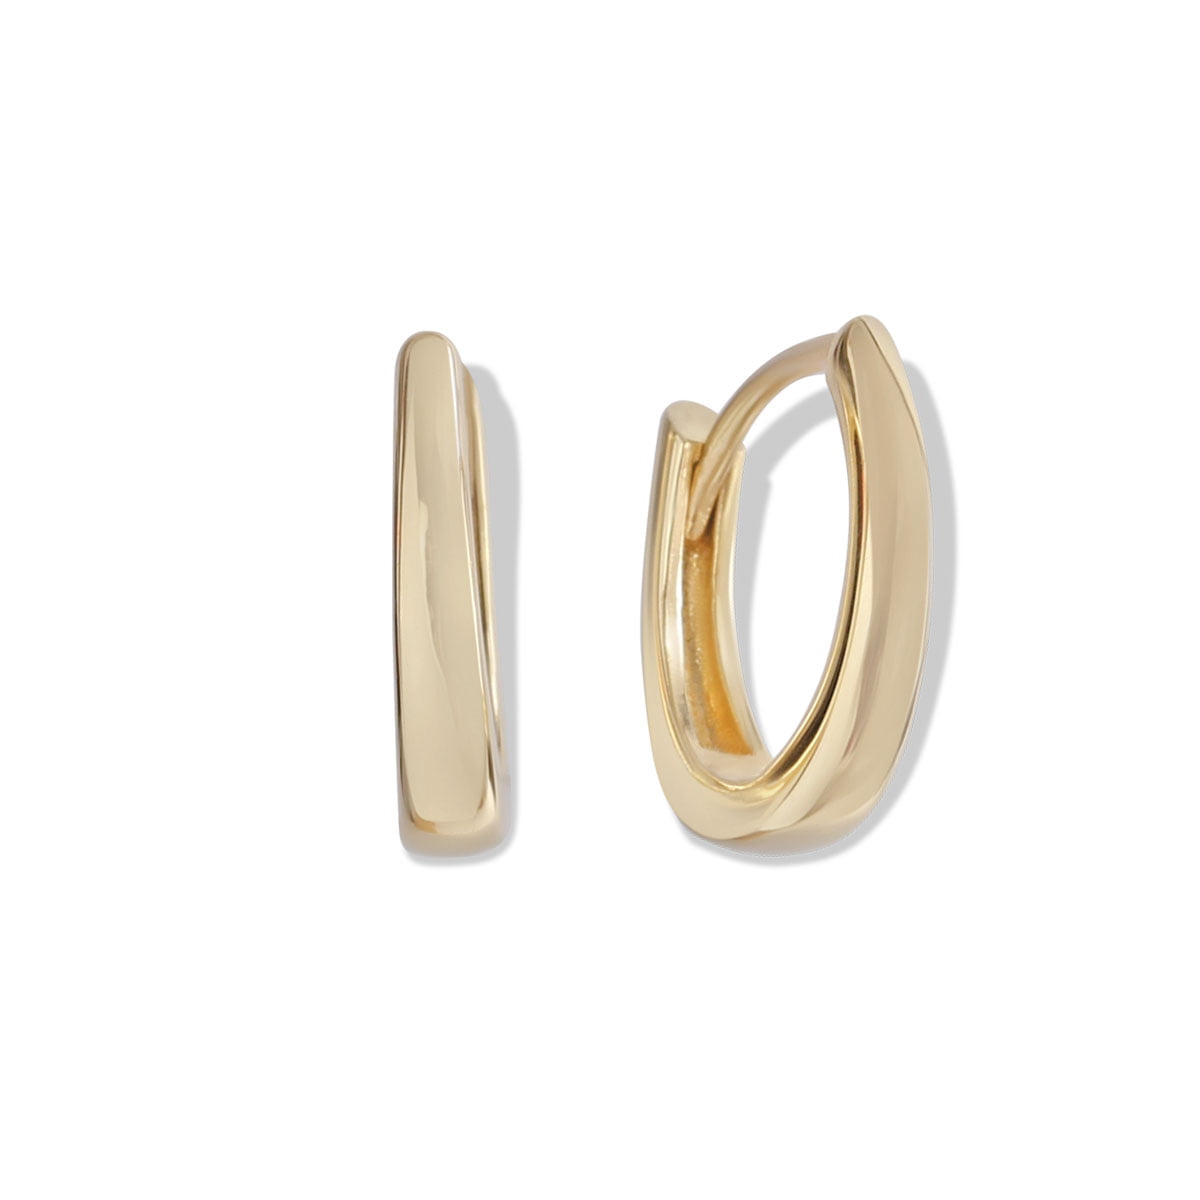 18ct Yellow Gold Womens Small Hoop Earrings